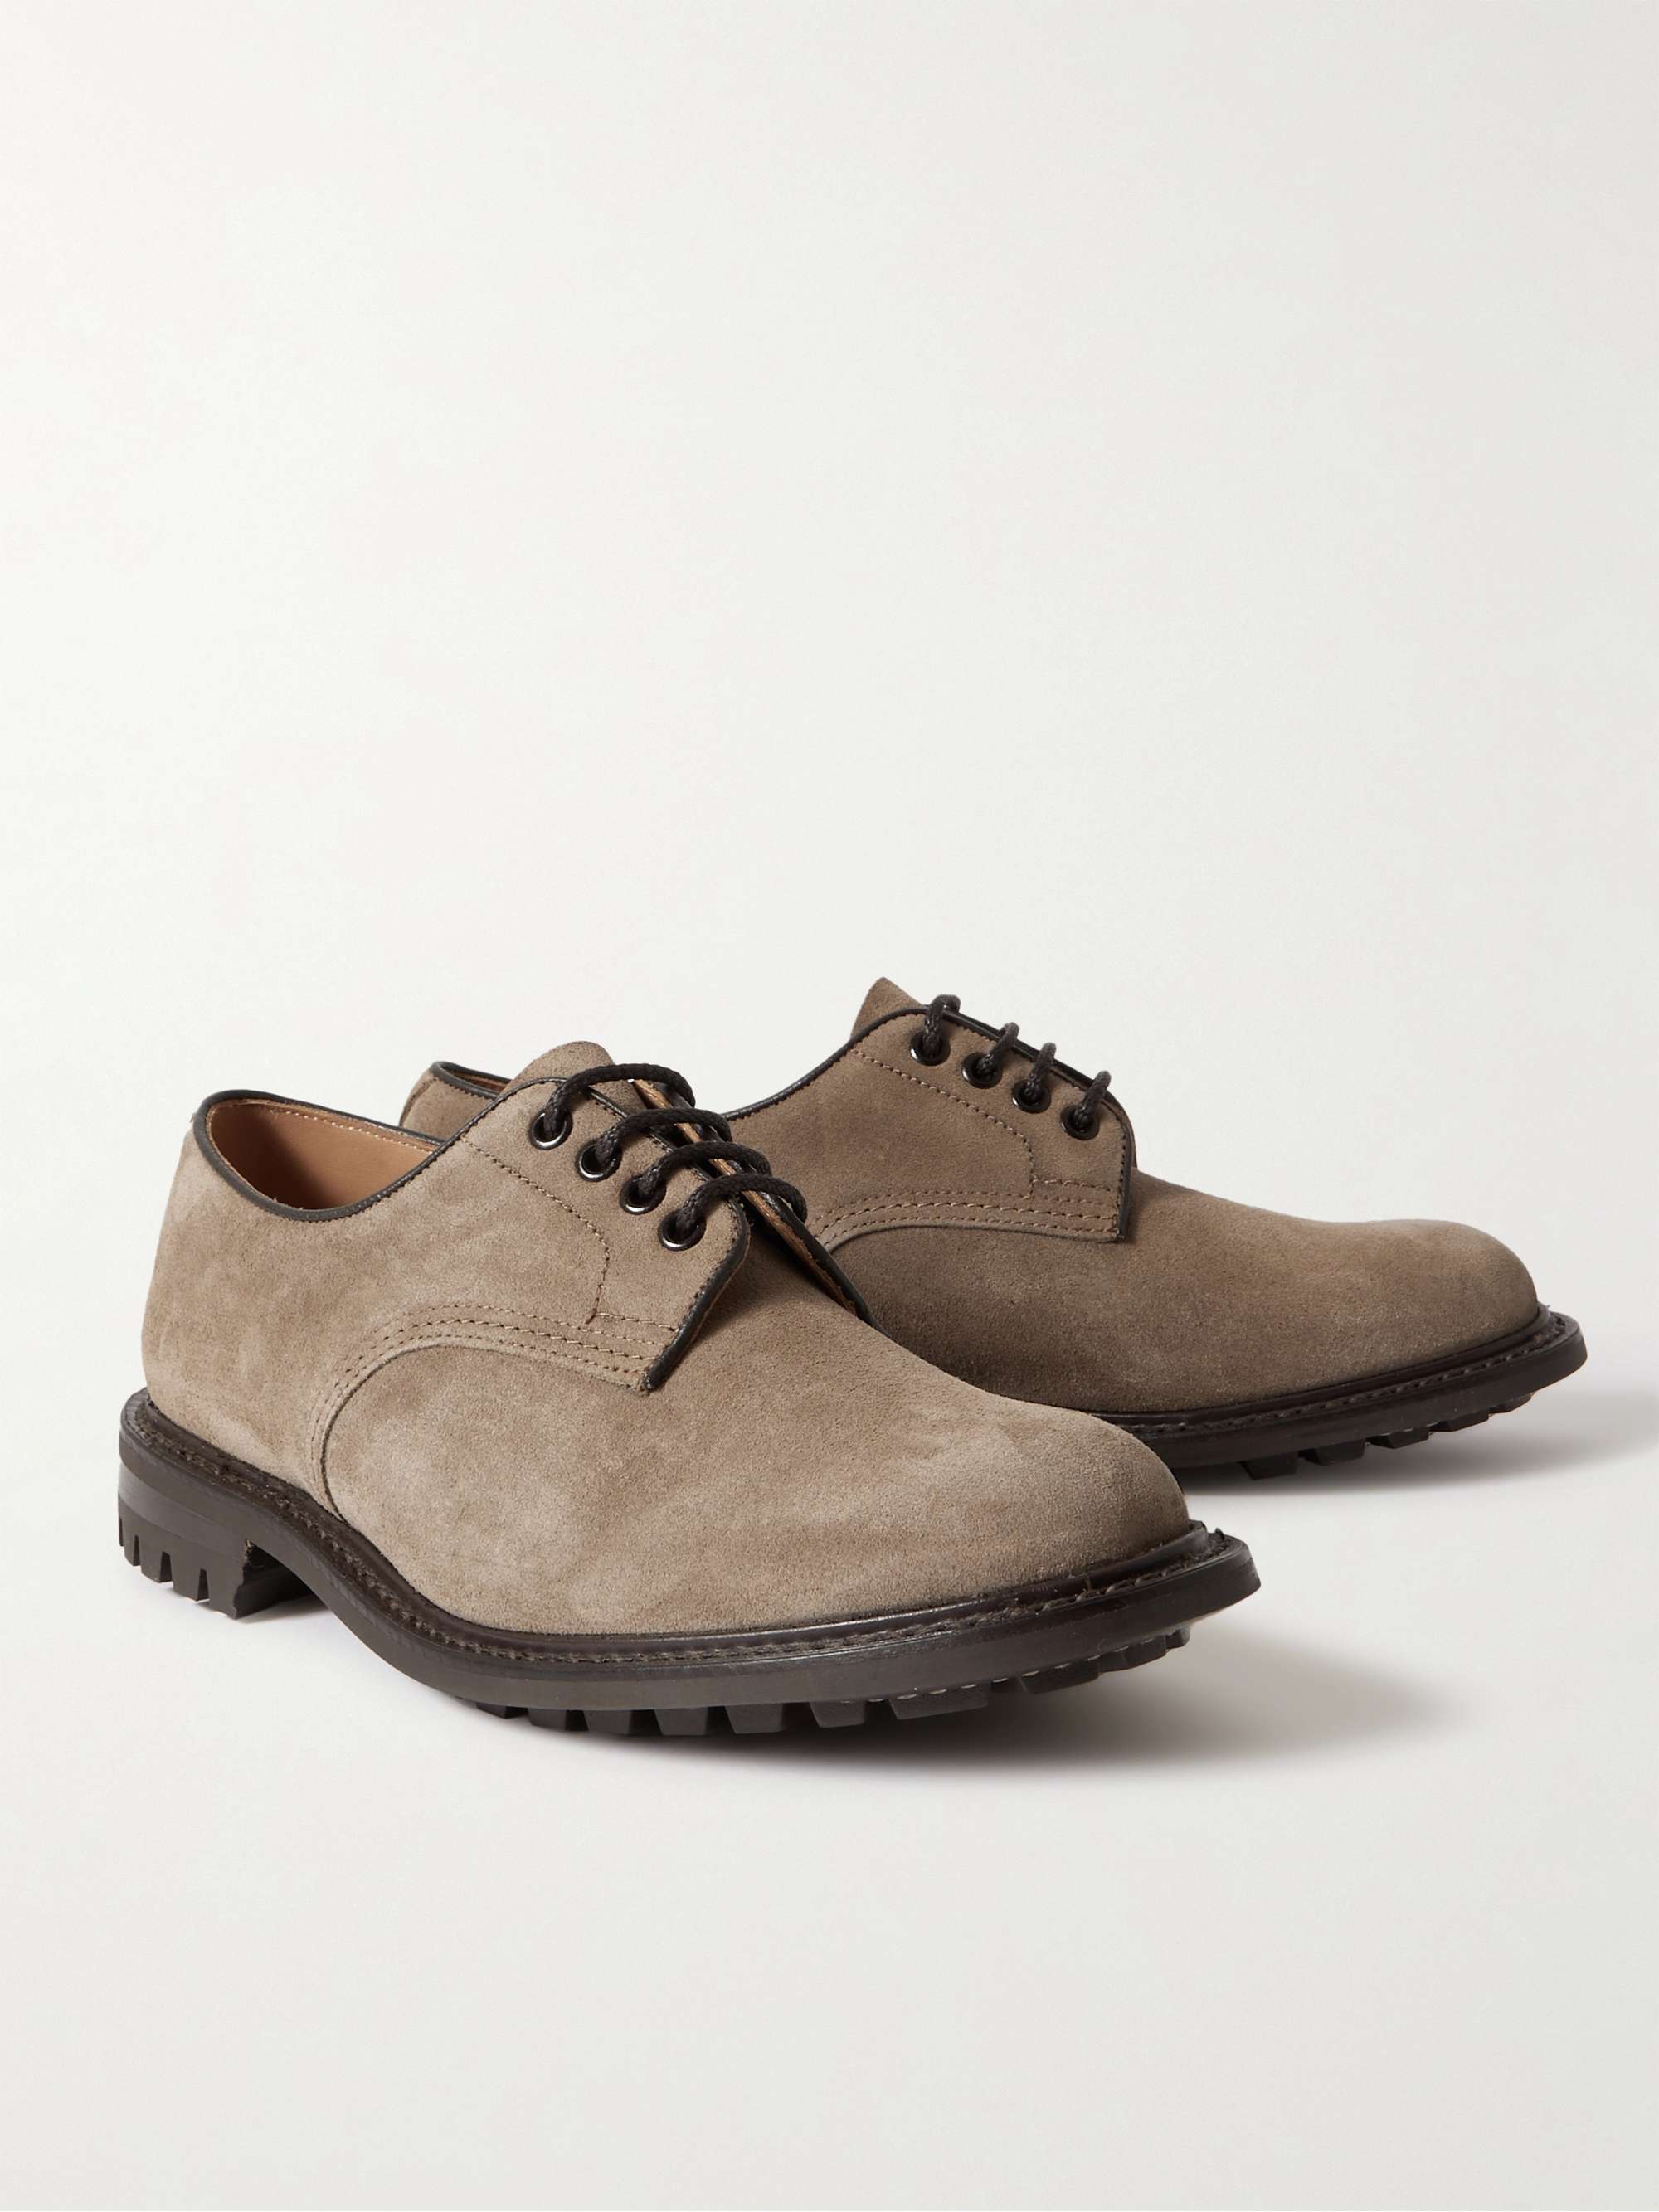 TRICKER'S Daniel Leather-Trimmed Suede Derby Shoes